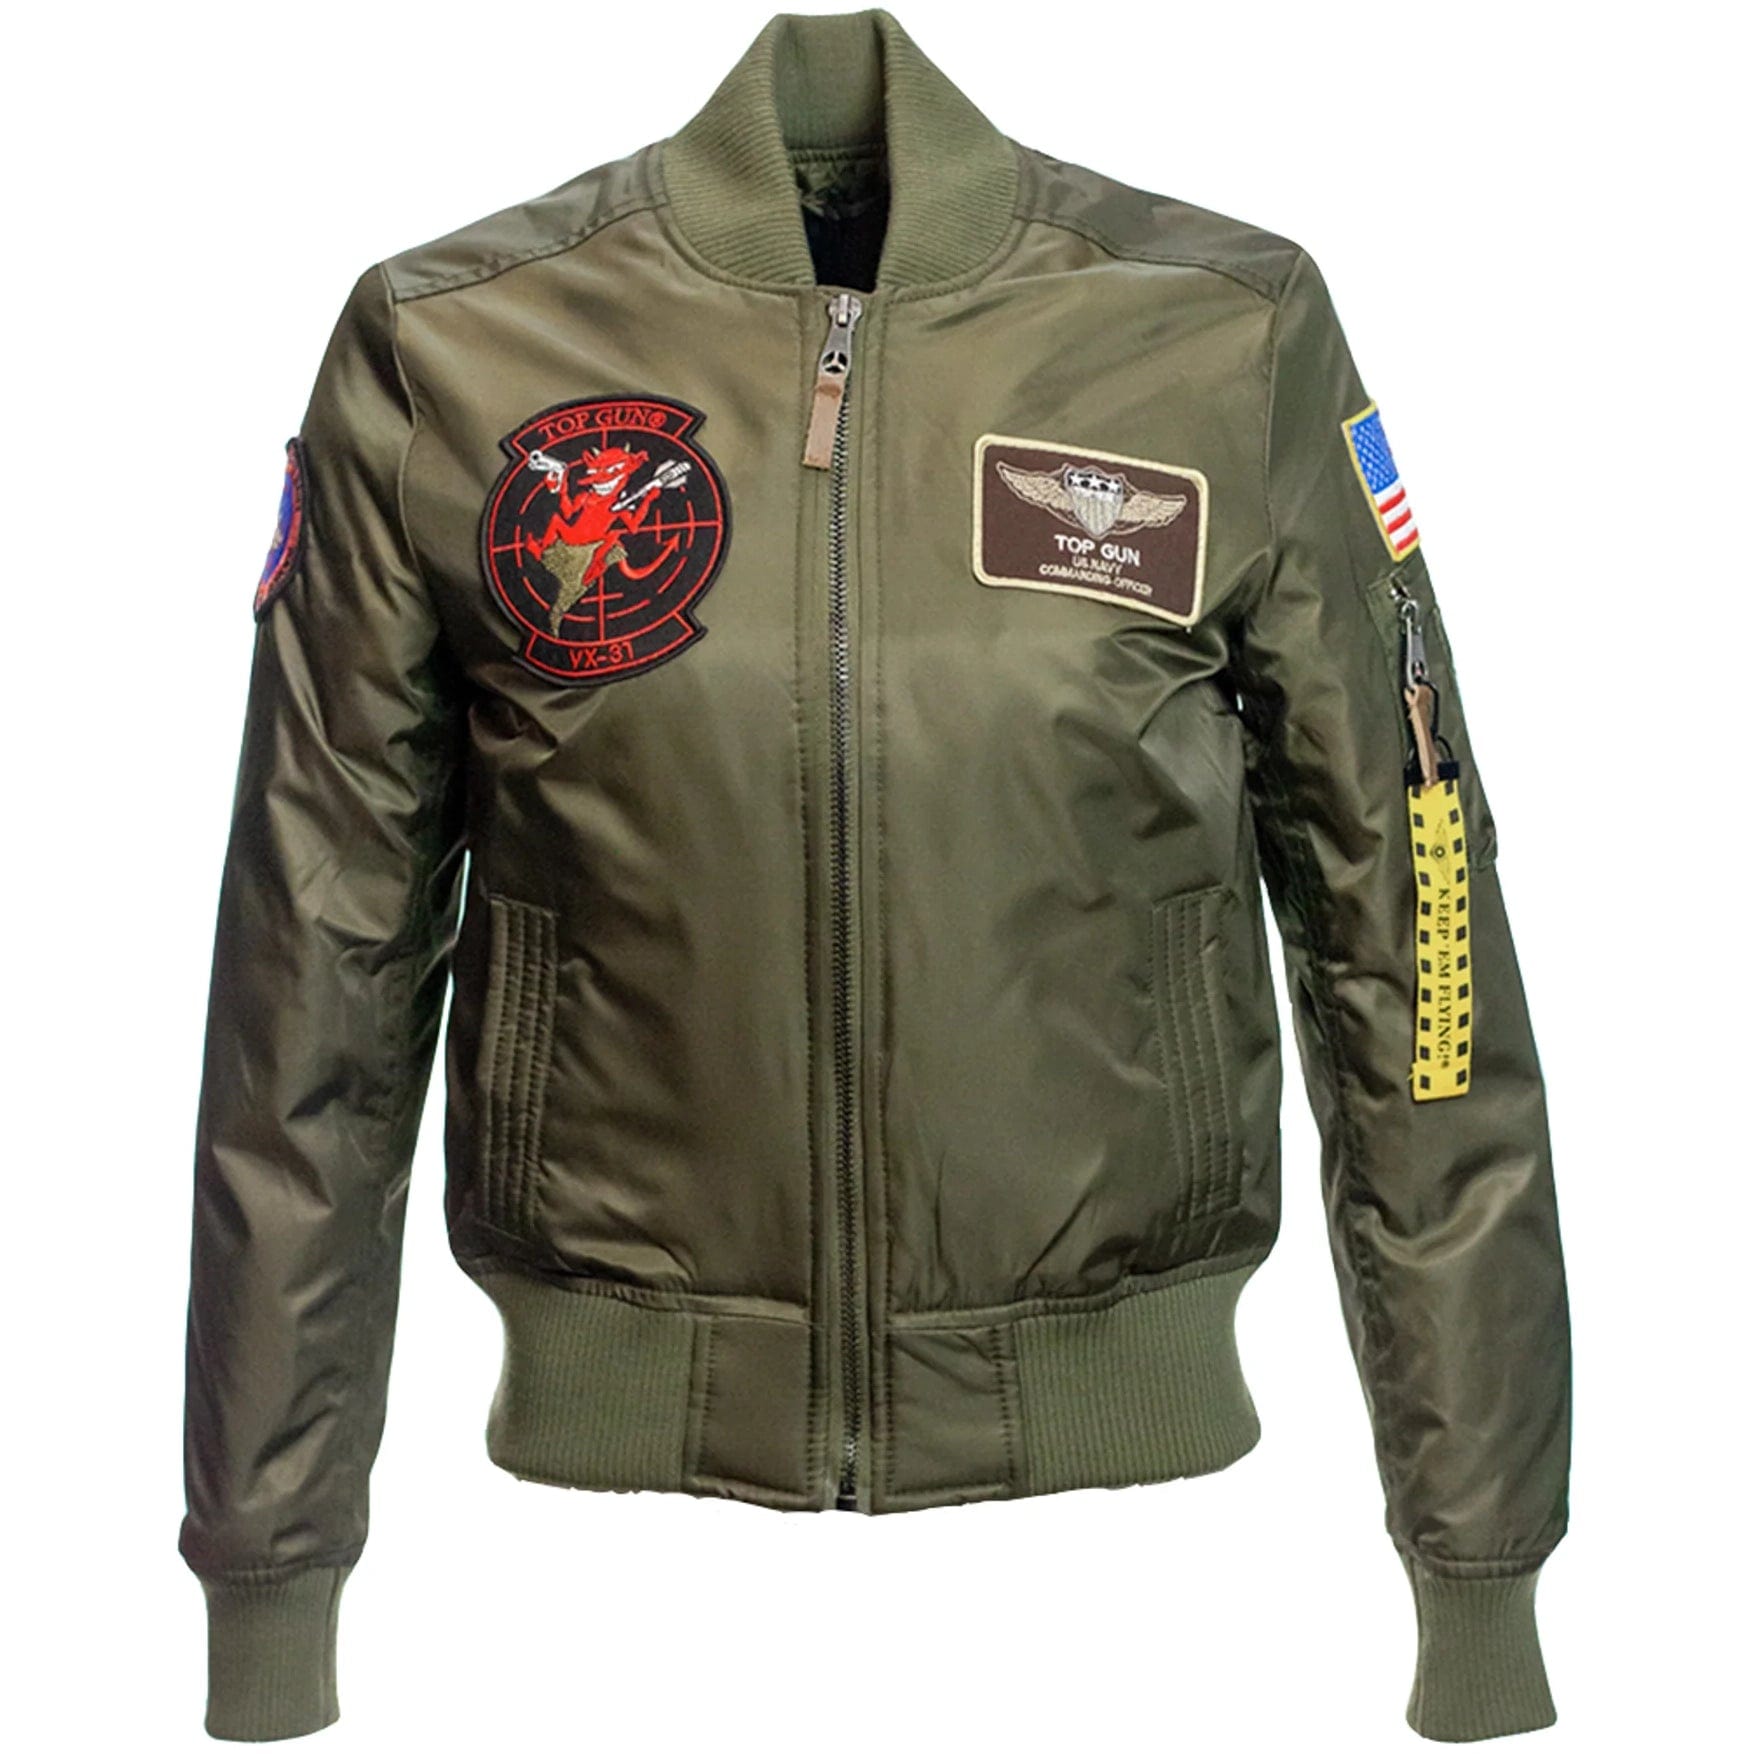 Top Gun Official Miss Top Gun MA-1 with Patches